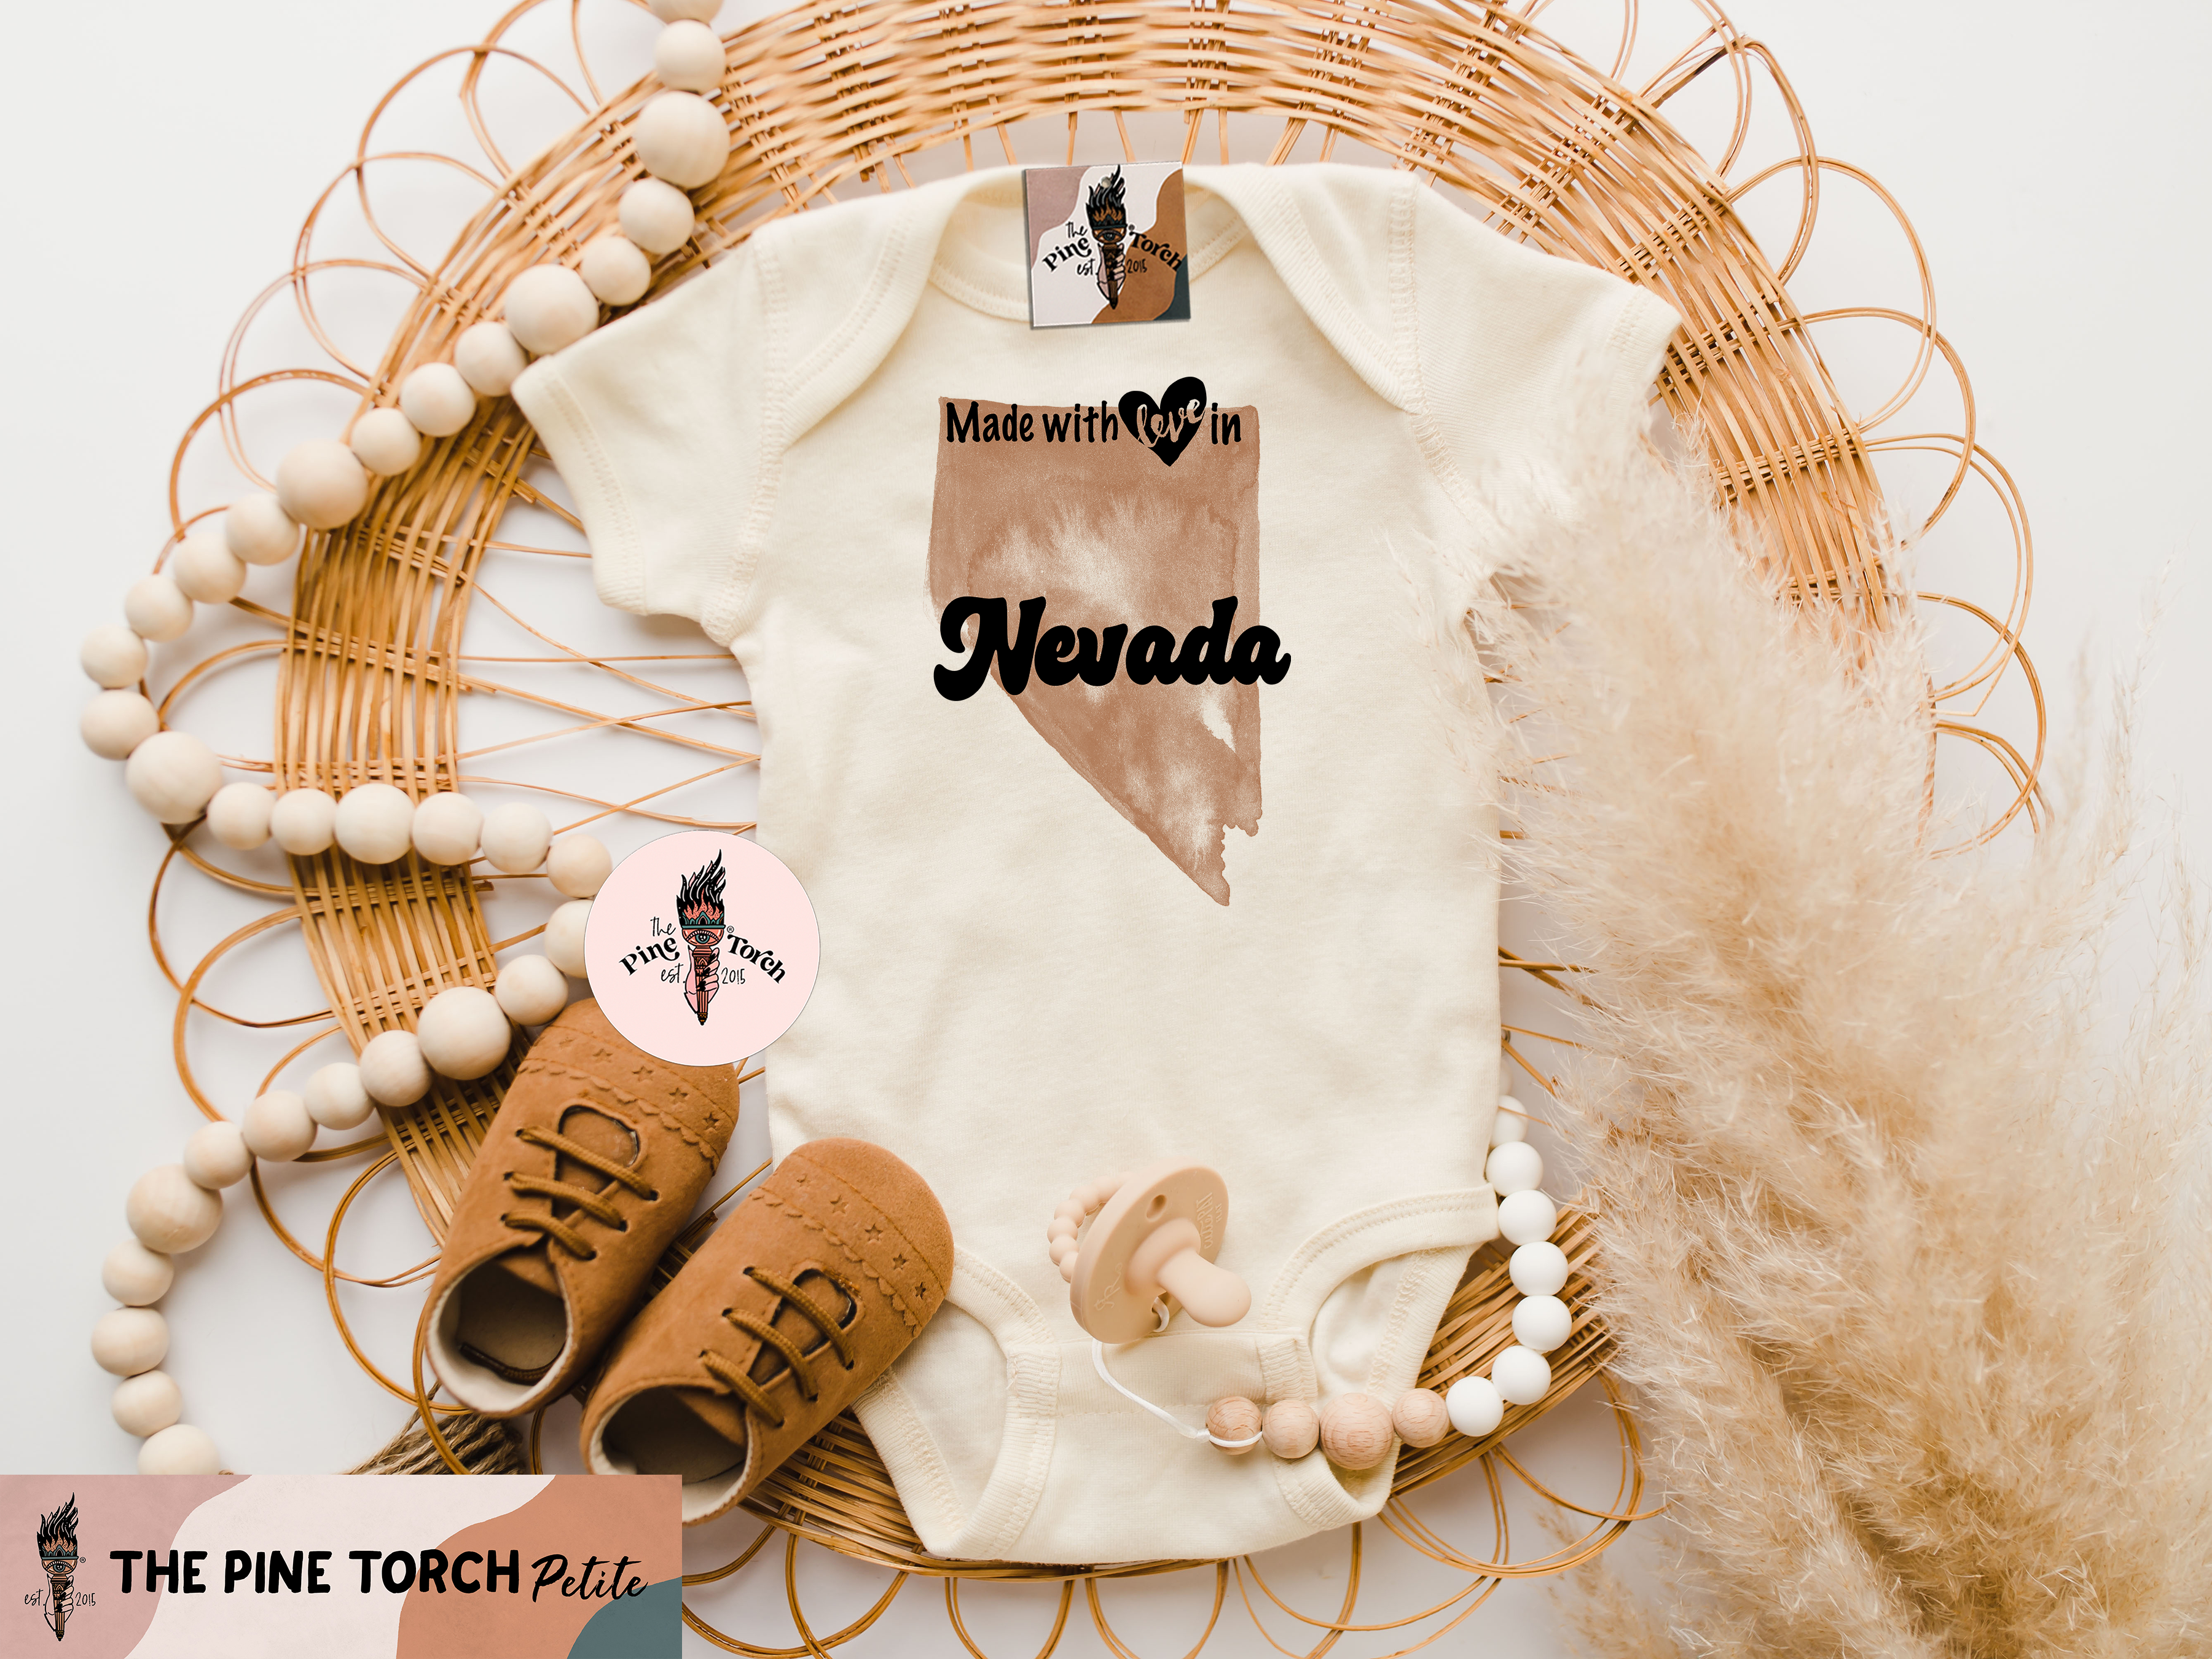 « MADE WITH LOVE IN NEVADA » BODYSUIT